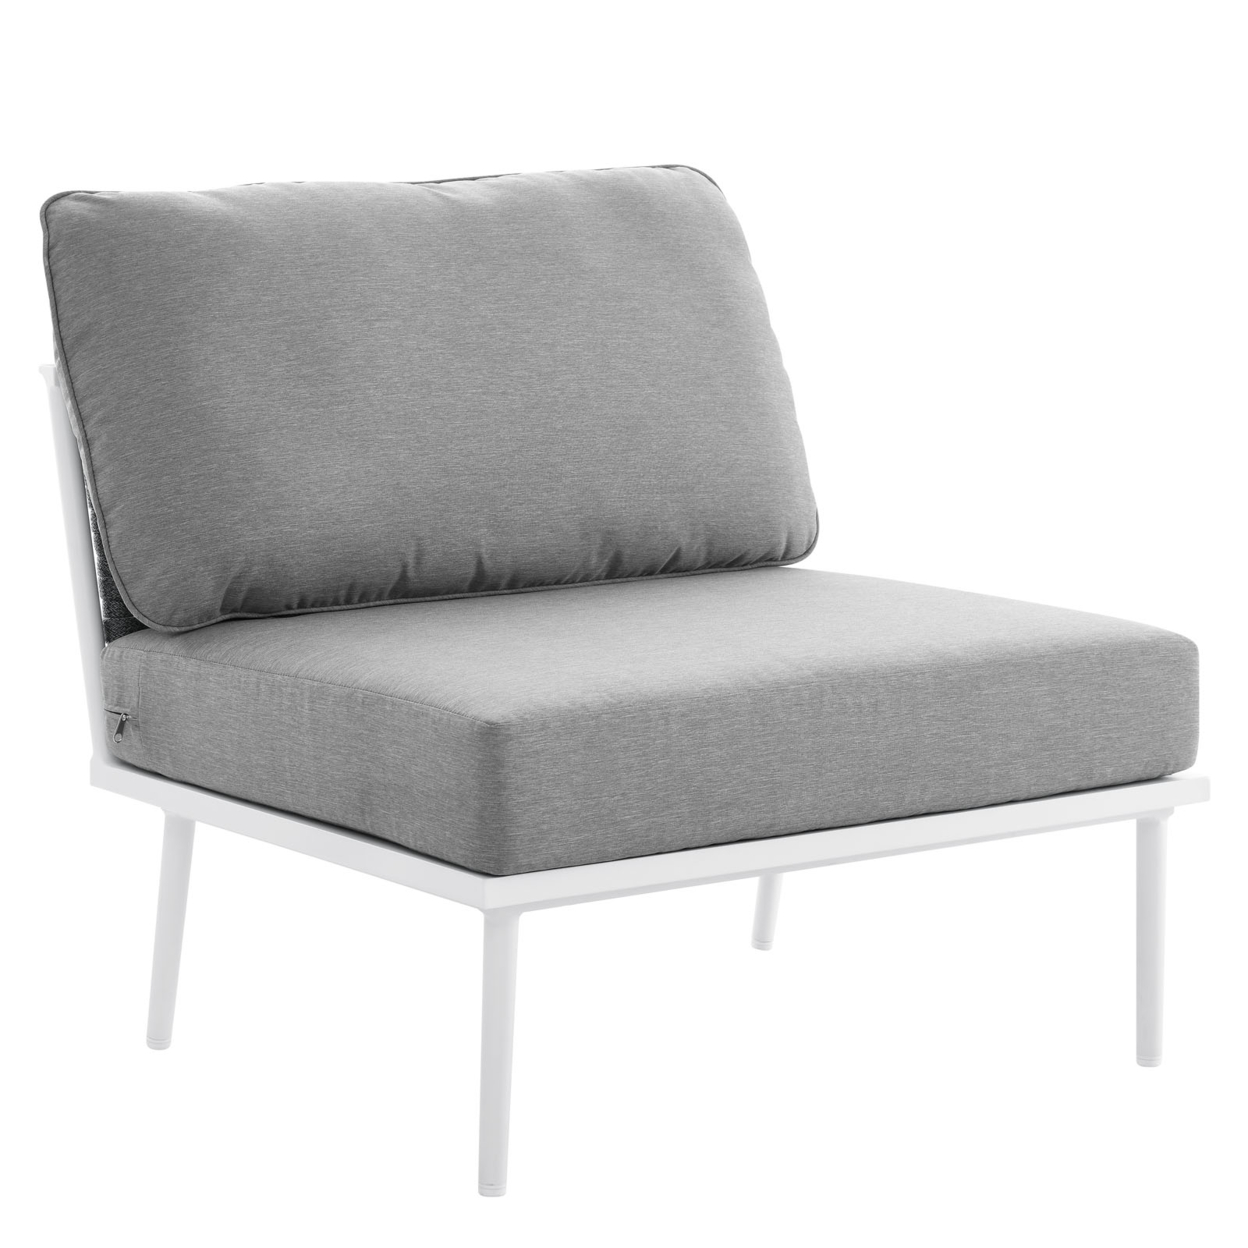 Modway Stance Modern Fabric & Aluminum Outdoor Armless Armchair in Gray - image 1 of 7